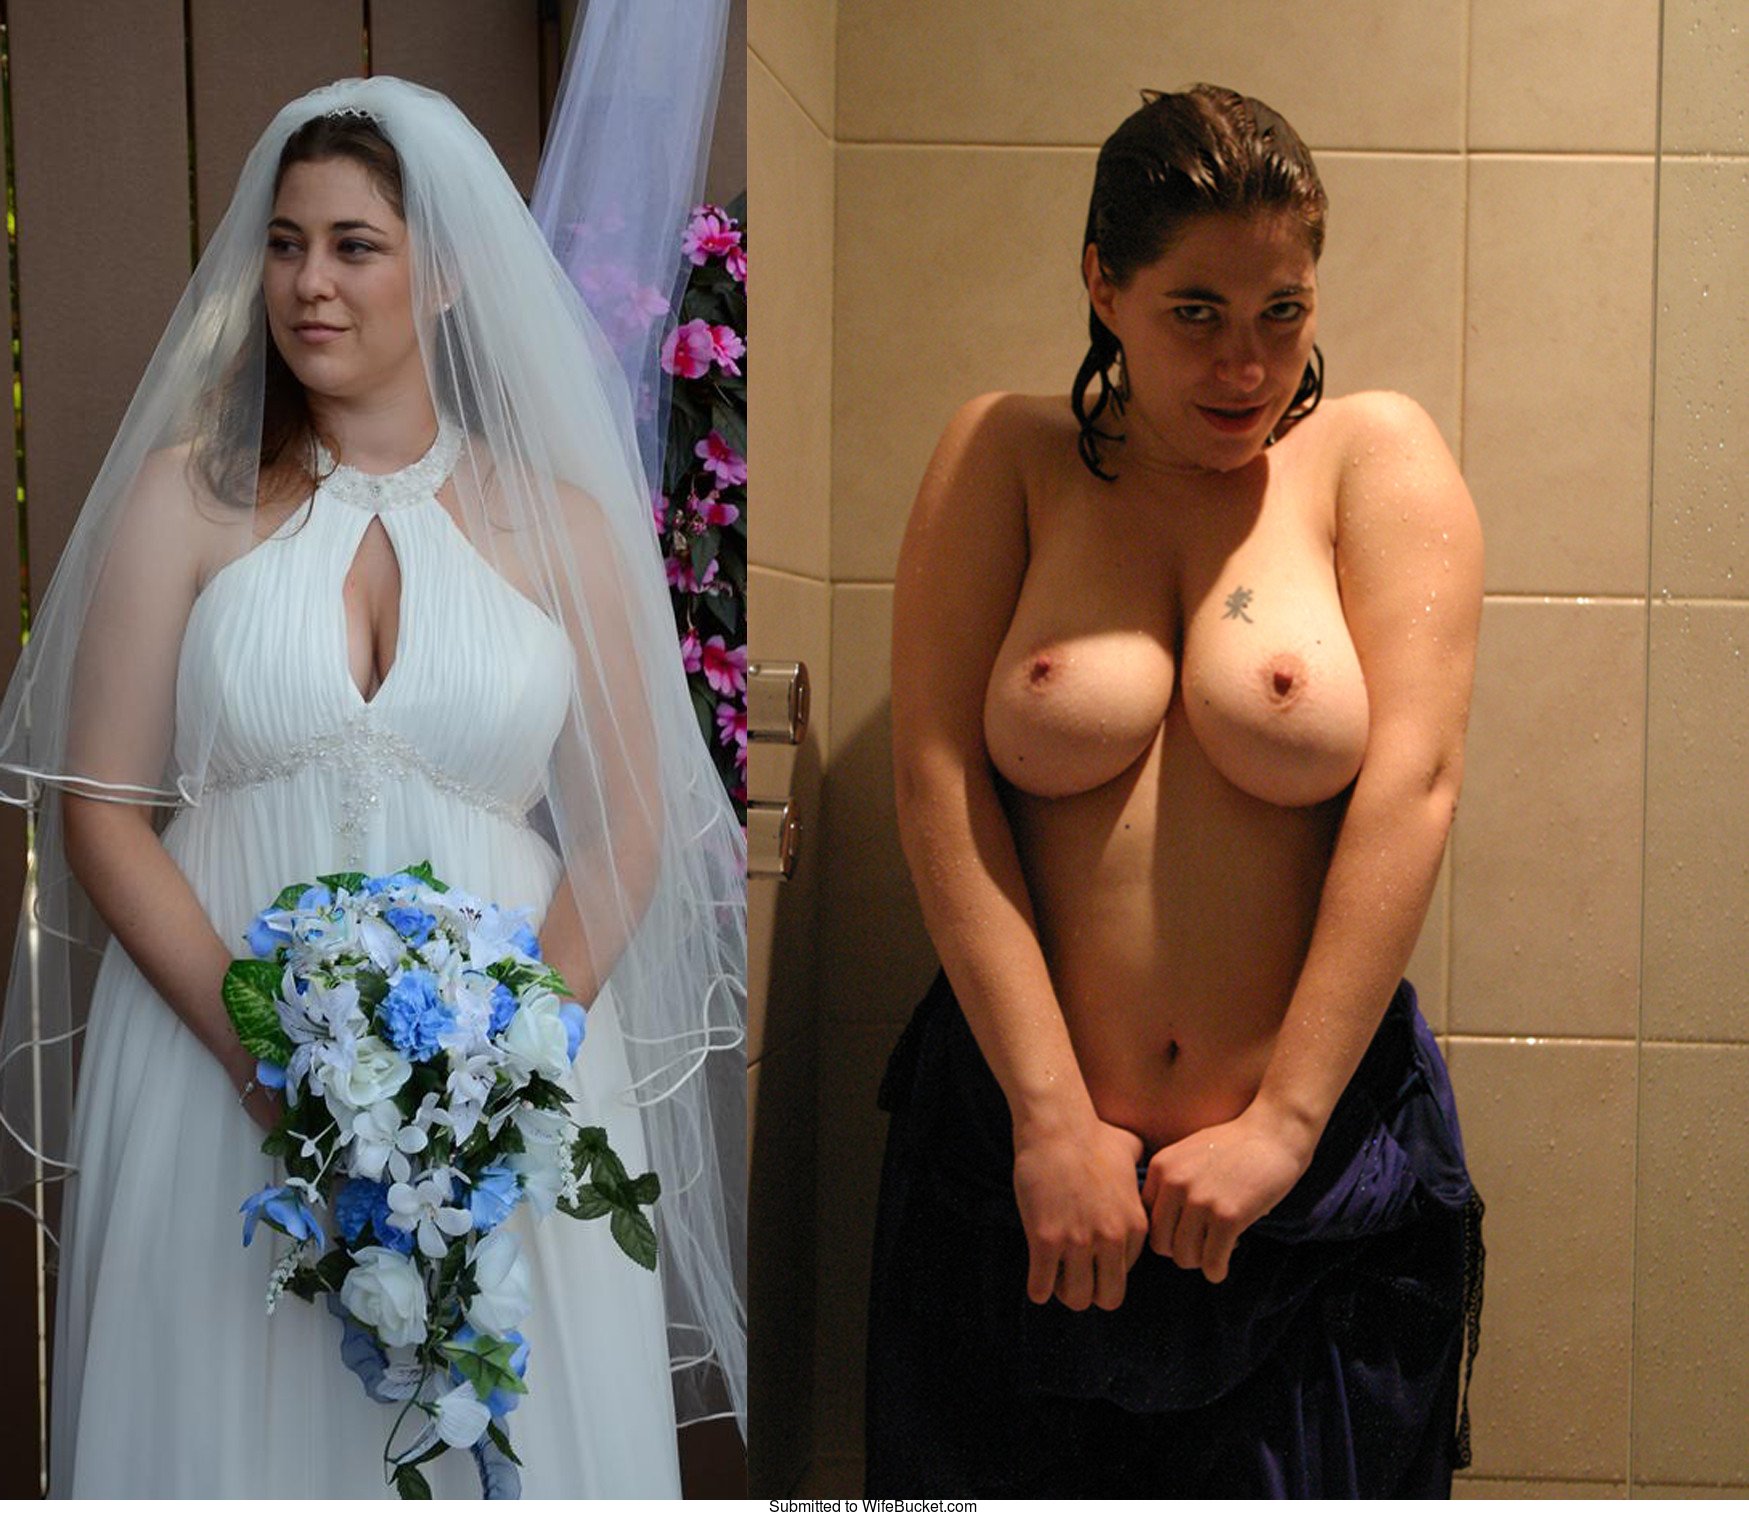 Nudes off on and Nude Brides